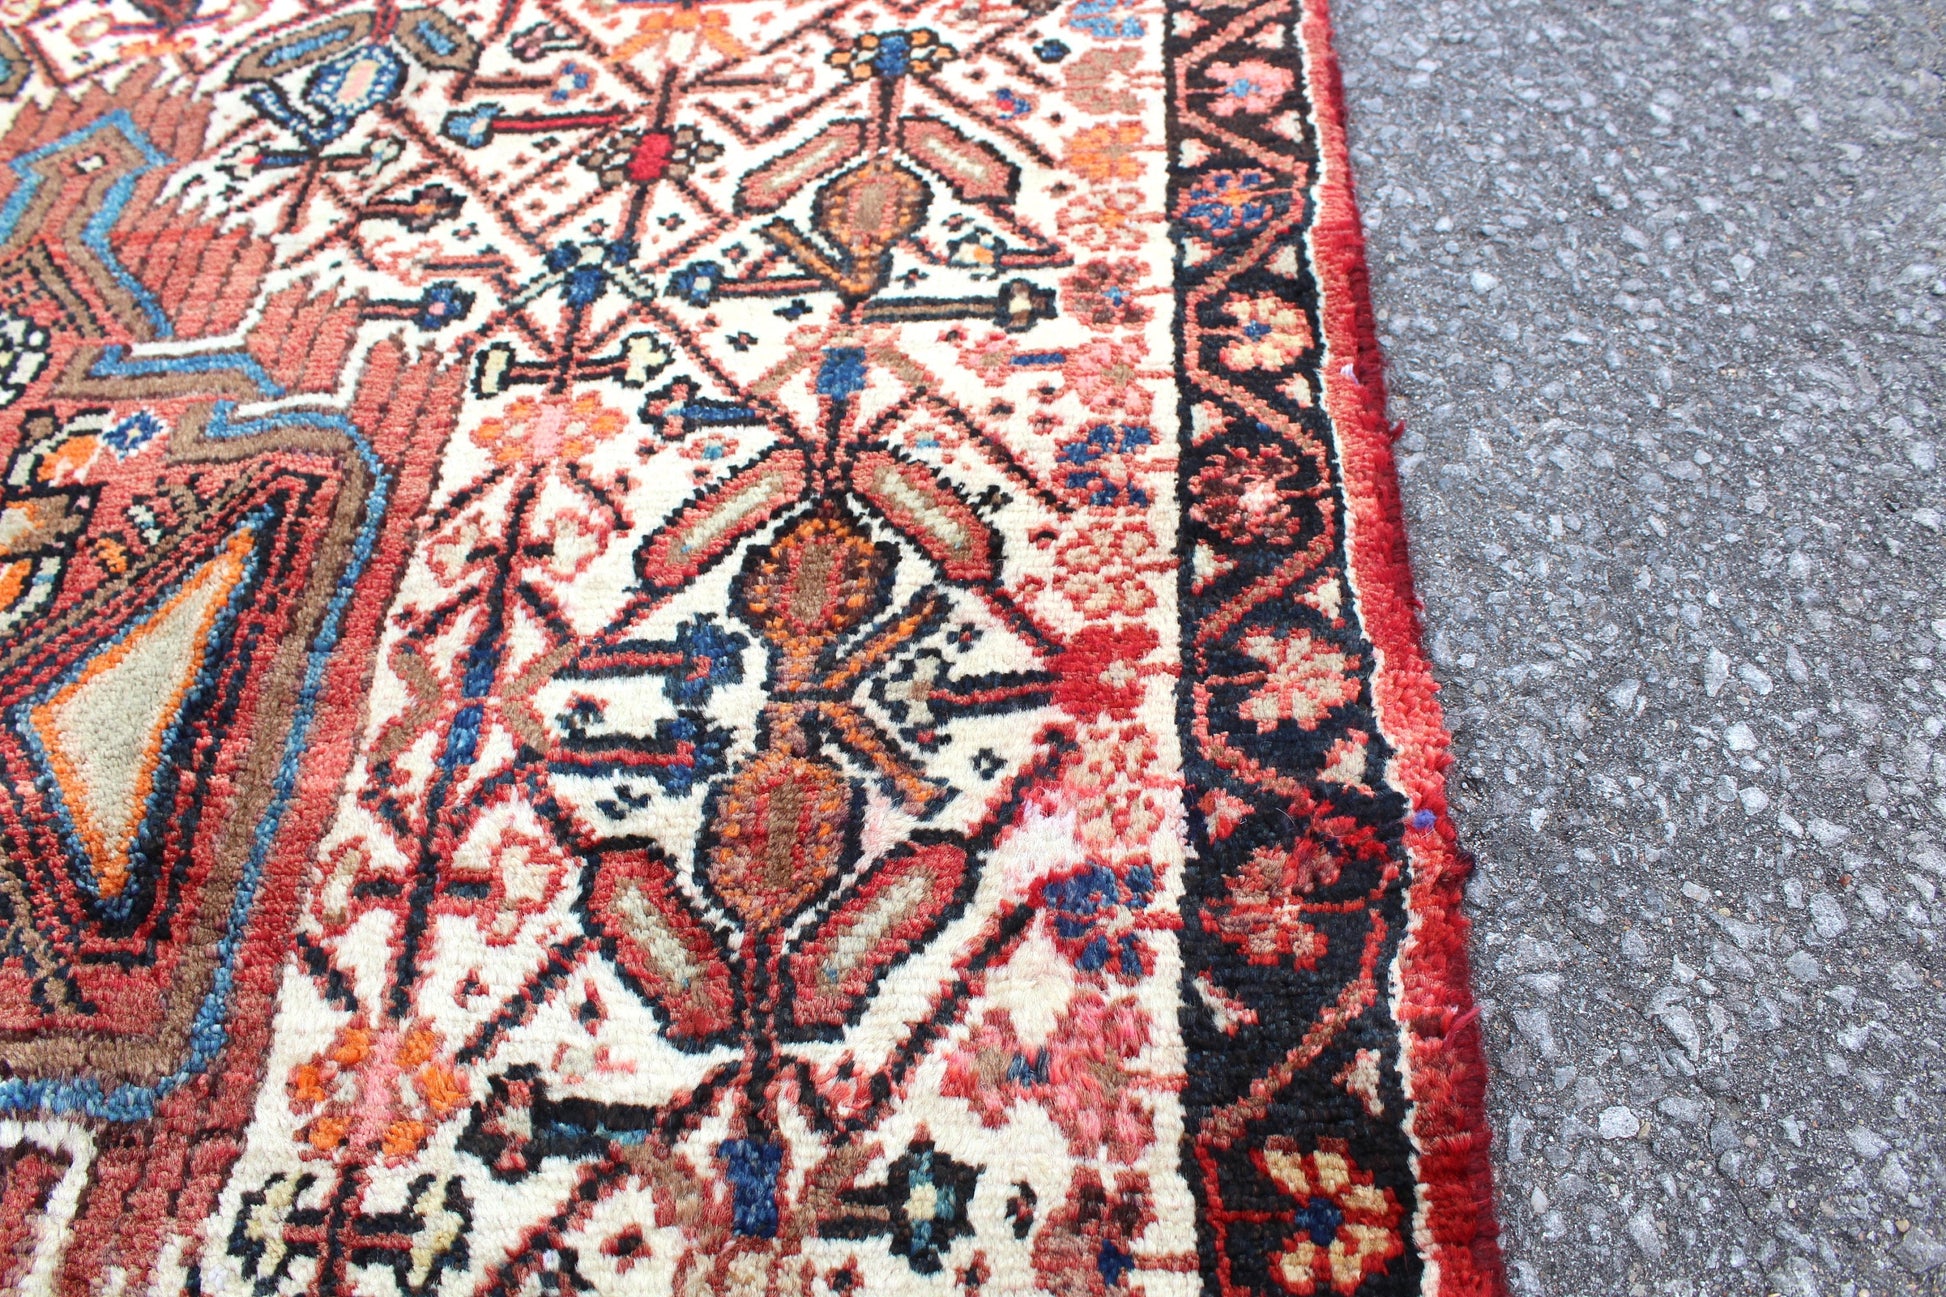 Ivory Runner Rug 3'6" x 6'11" with Coral Green Persian Tribal Design